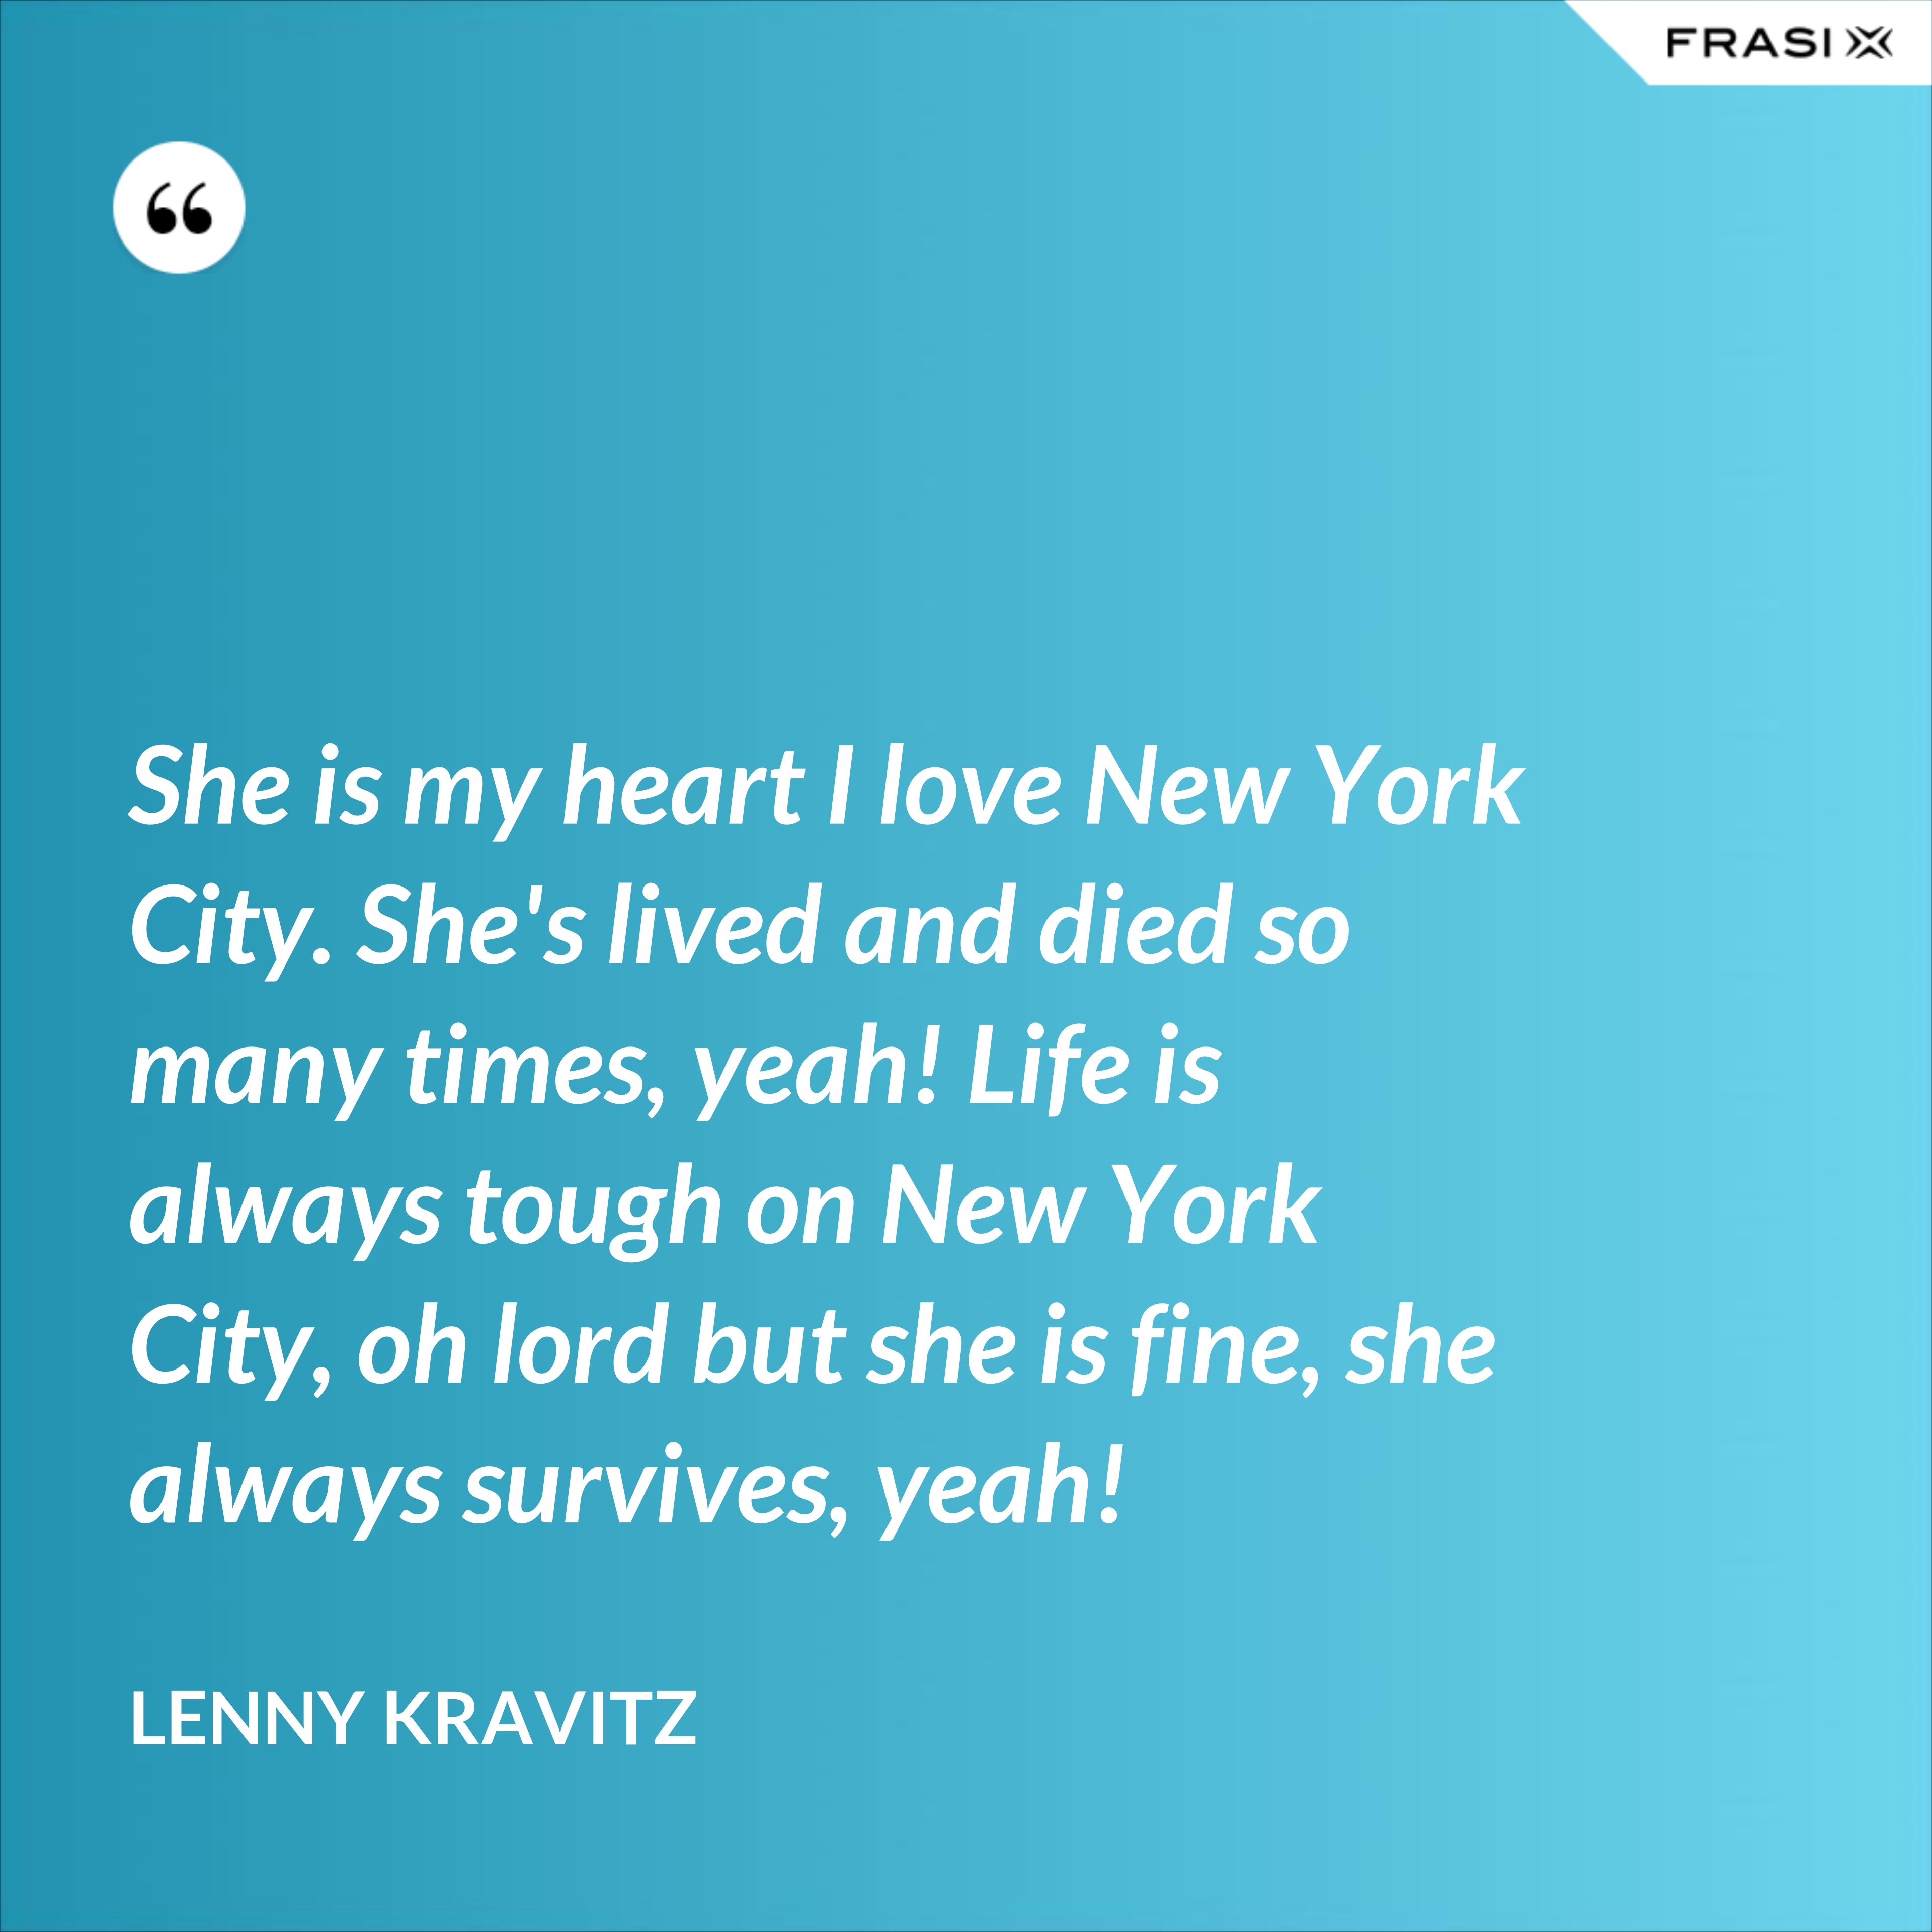 She is my heart I love New York City. She's lived and died so many times, yeah! Life is always tough on New York City, oh lord but she is fine, she always survives, yeah! - Lenny Kravitz